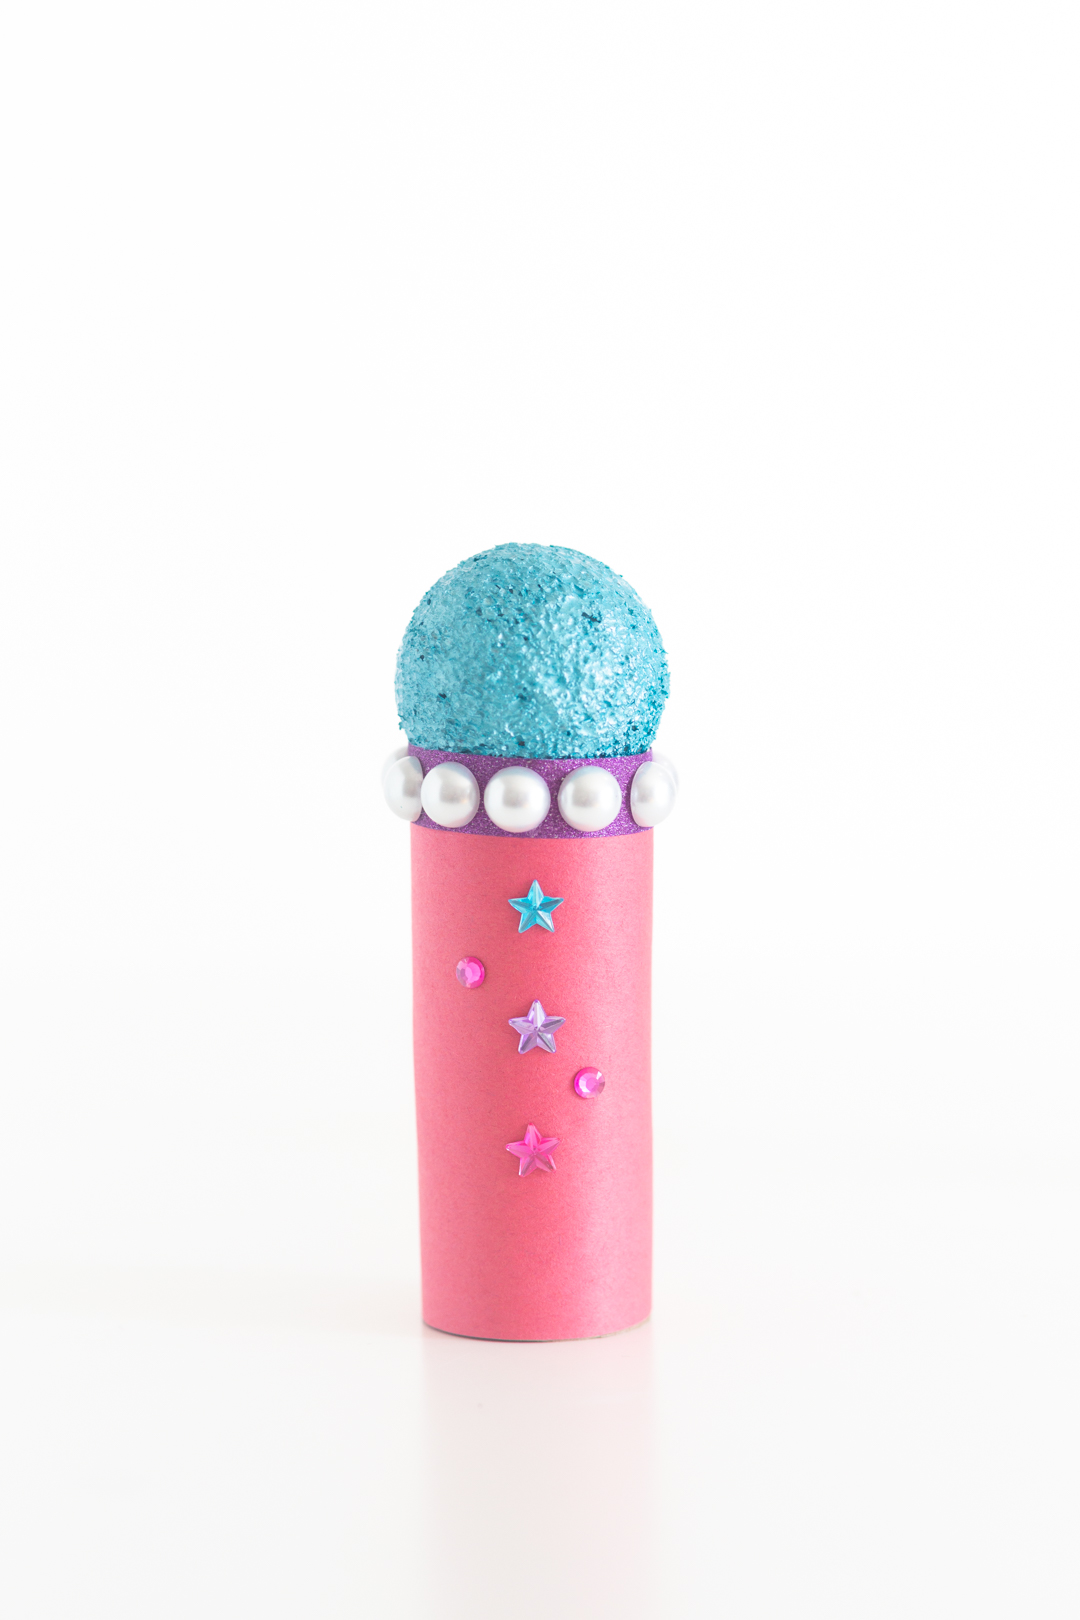 Pink, blue and purple diy microphone craft with faux pearls and sticker gems